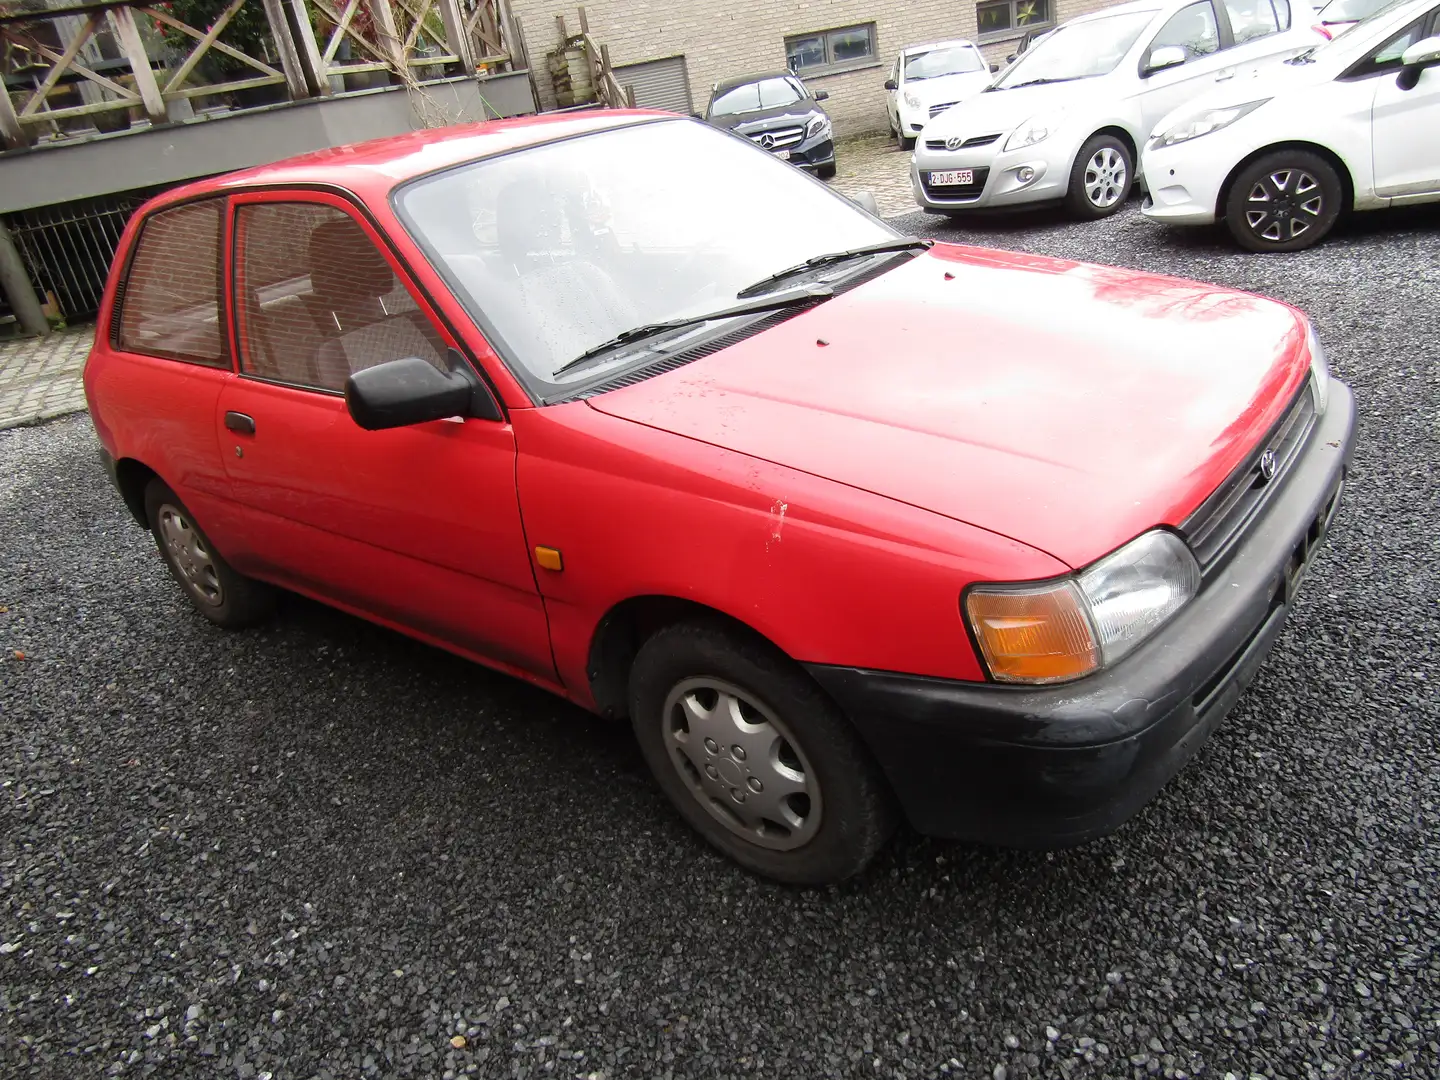 Toyota Starlet 1.0i (immatriculation ancêtre possible) 32 ans Rood - 1